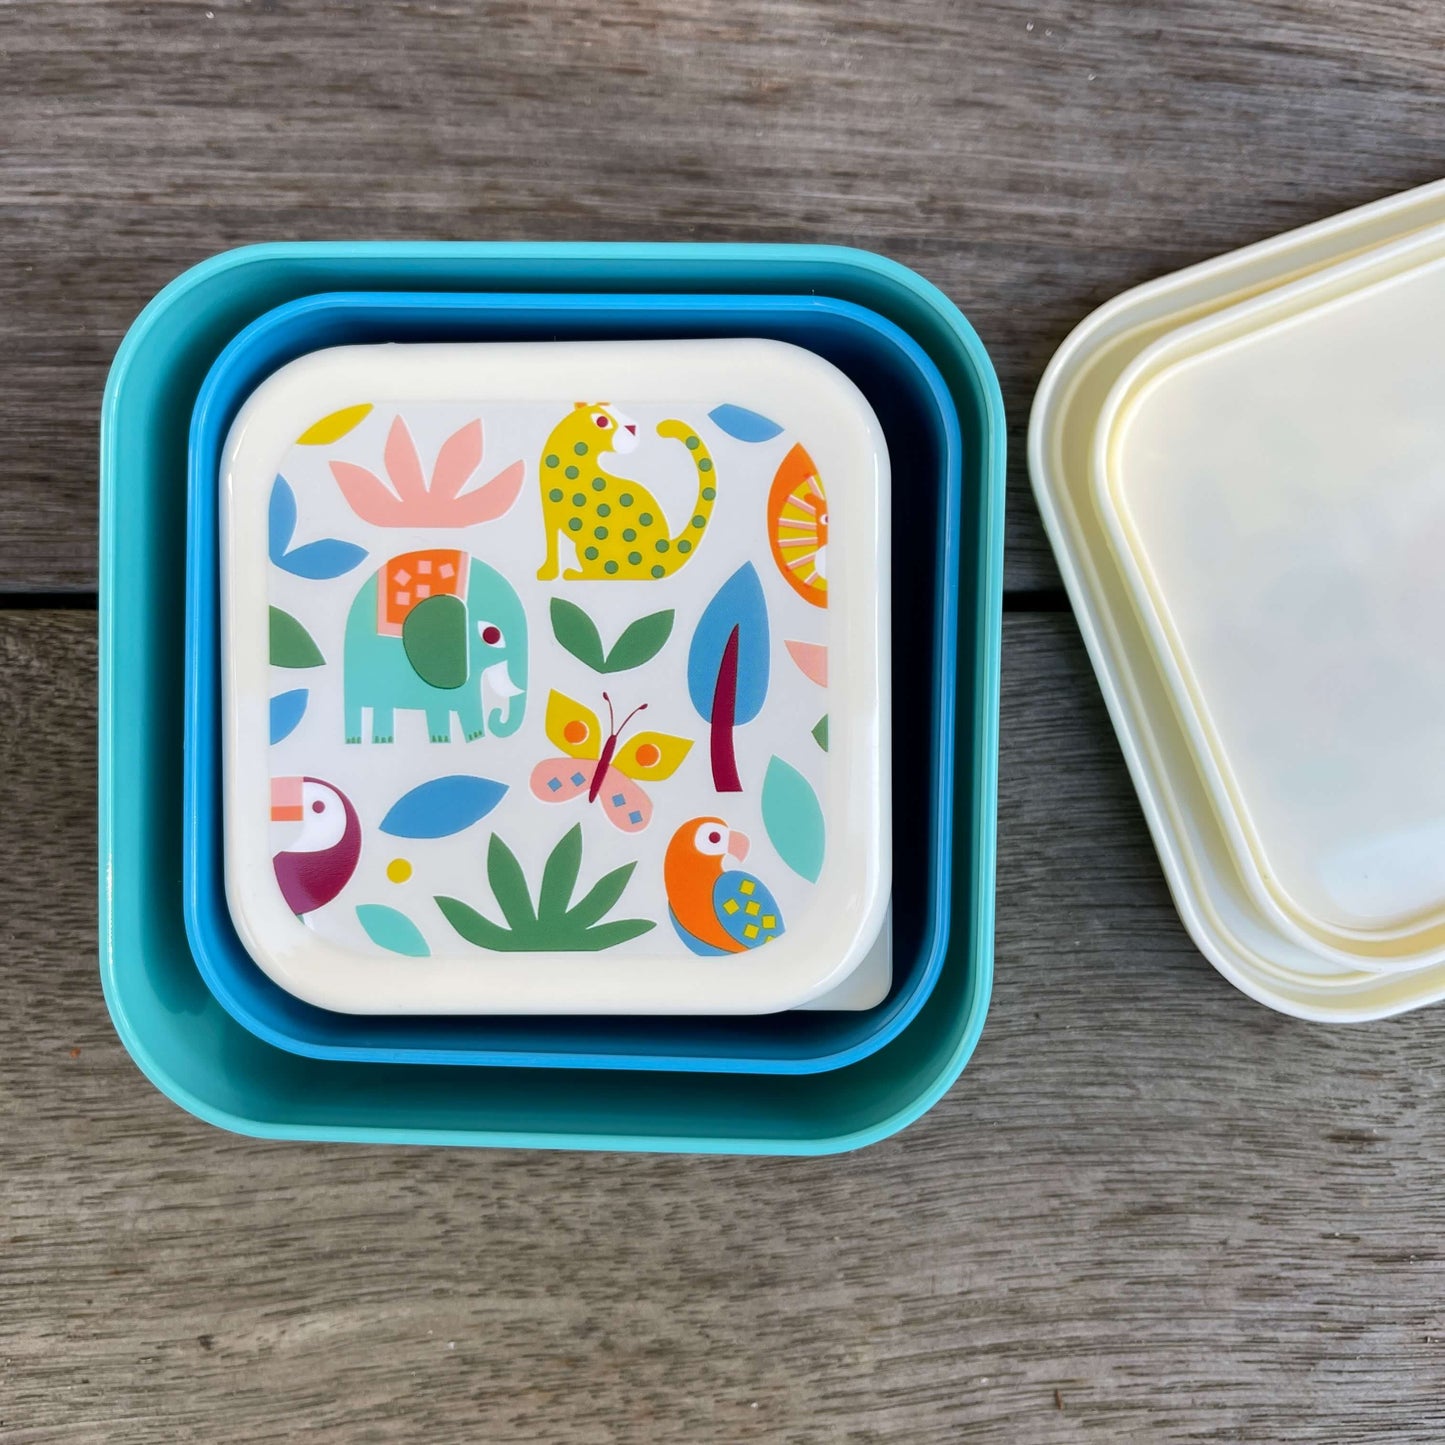 Trio of snack boxes featuring jungle animals on the lids.